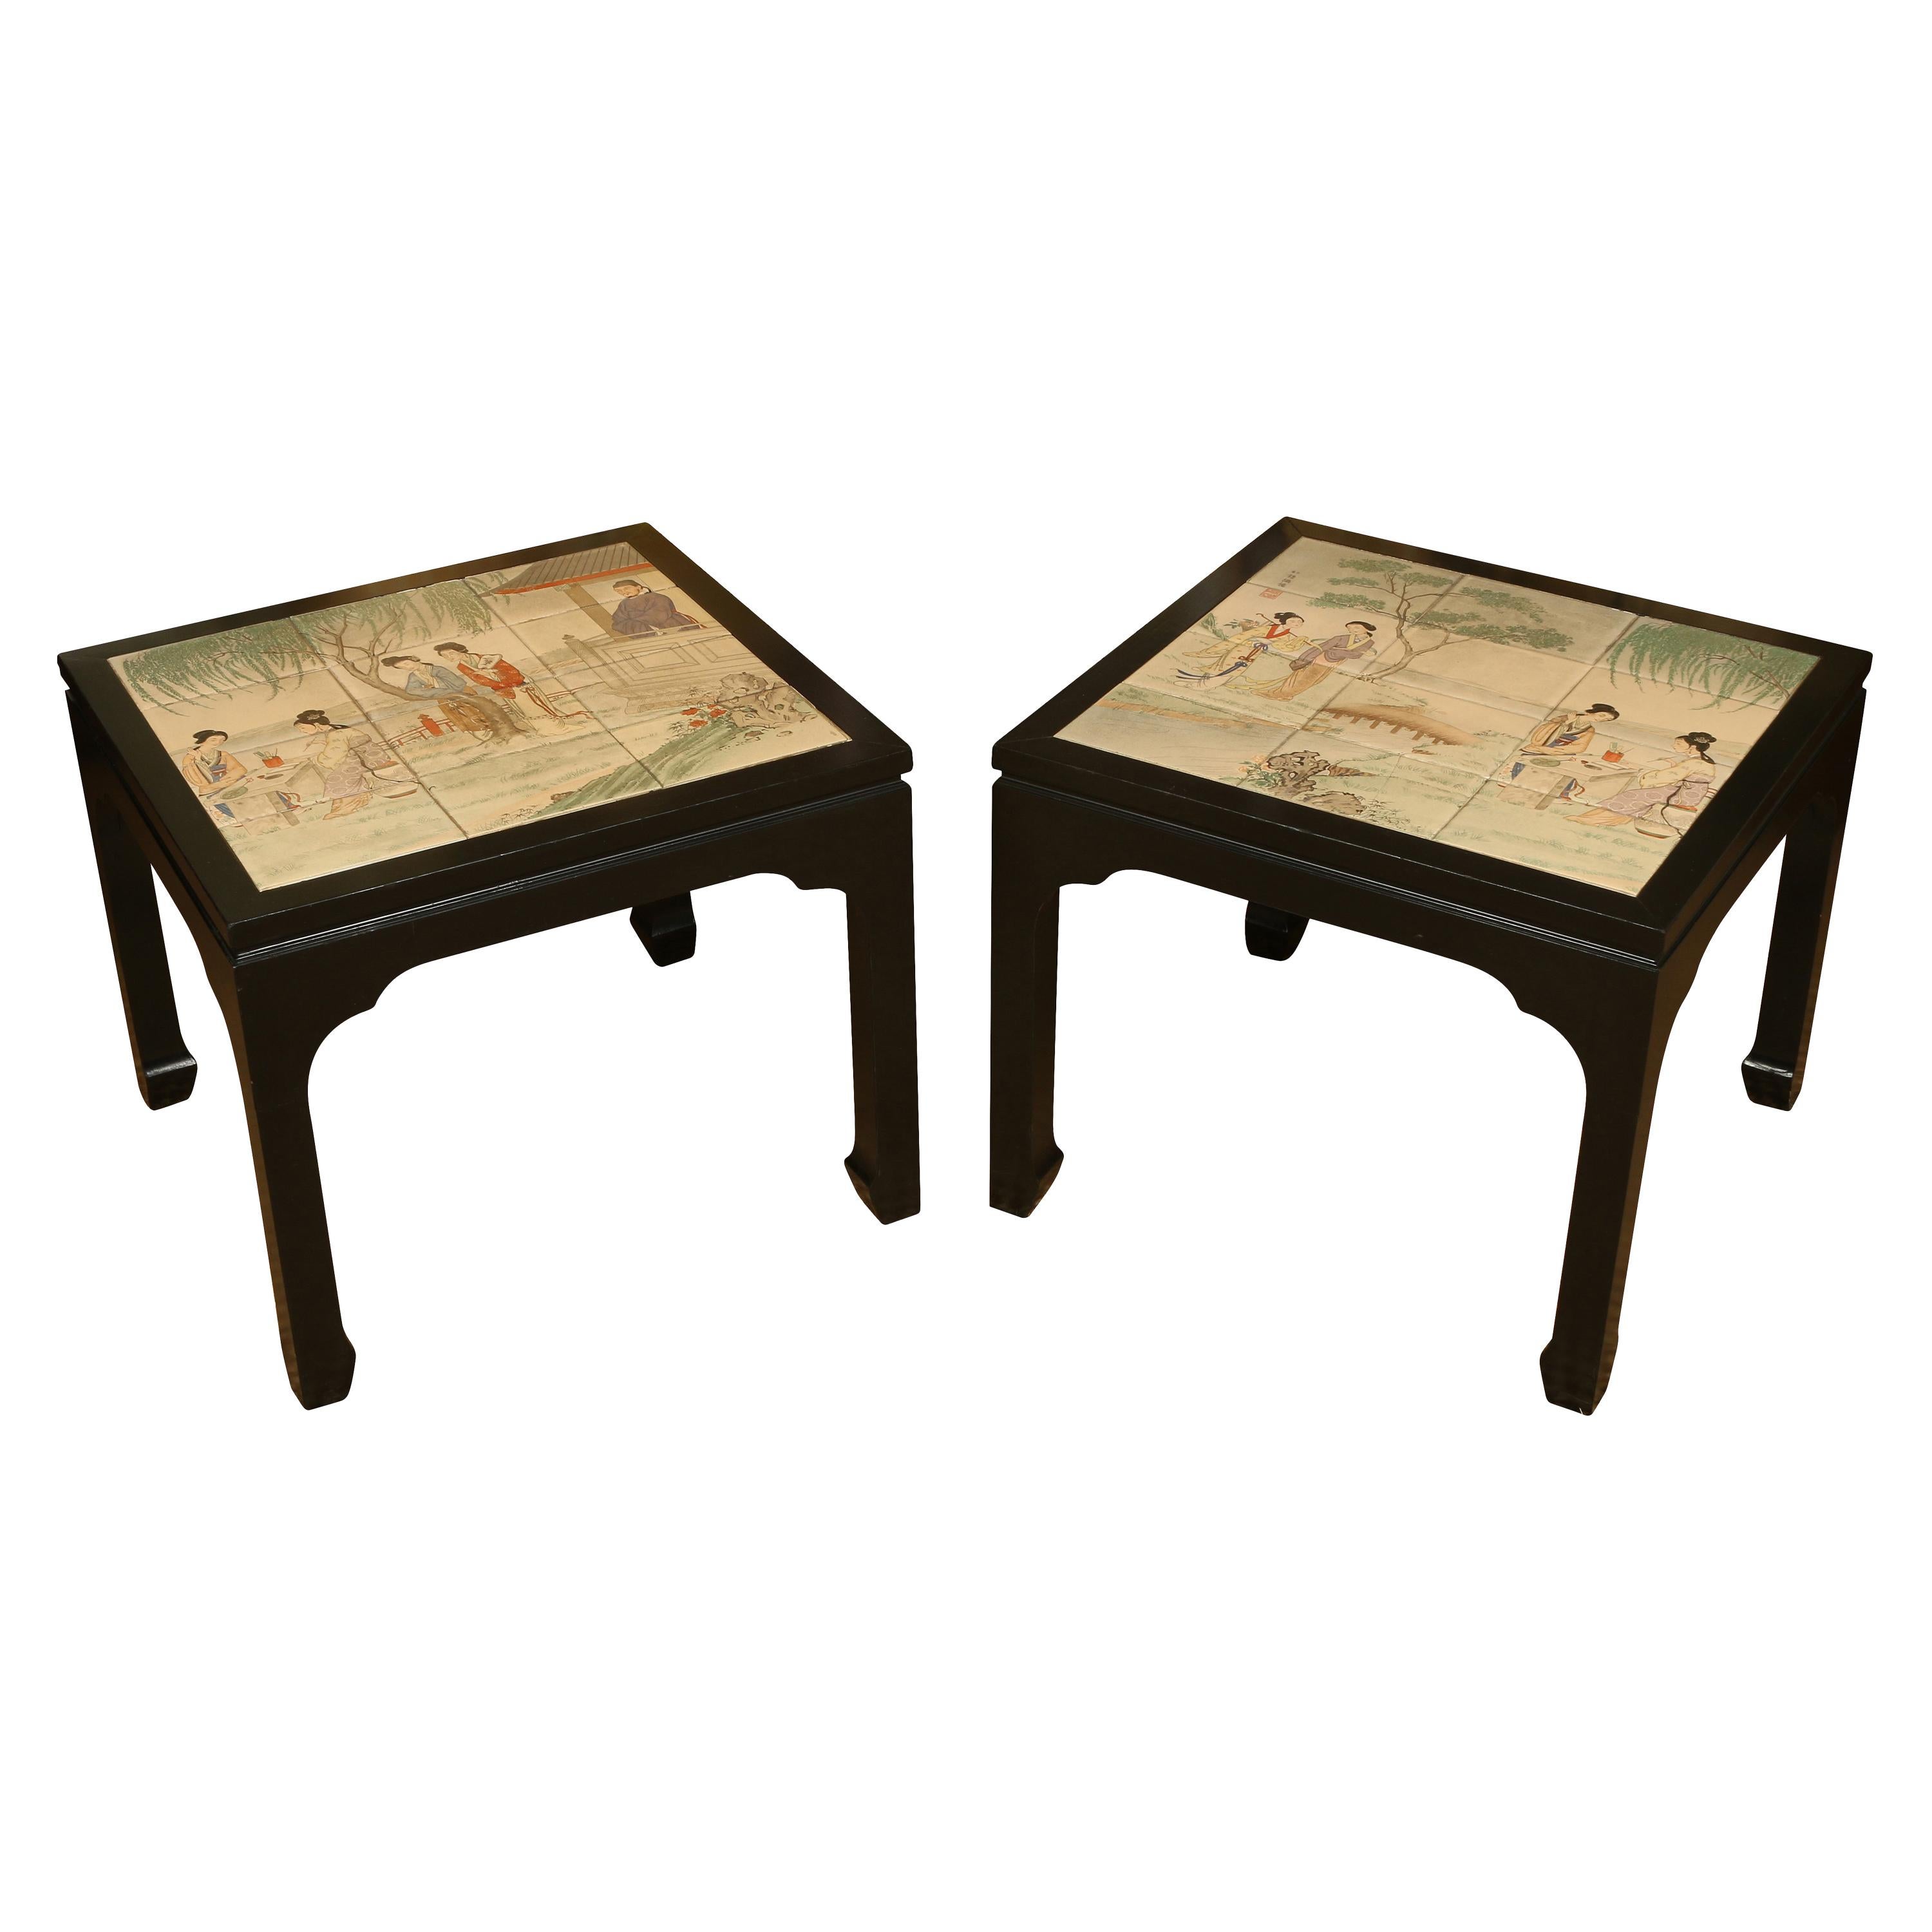 Pair of Chinese Style Inset Ceramic Tile Side Tables